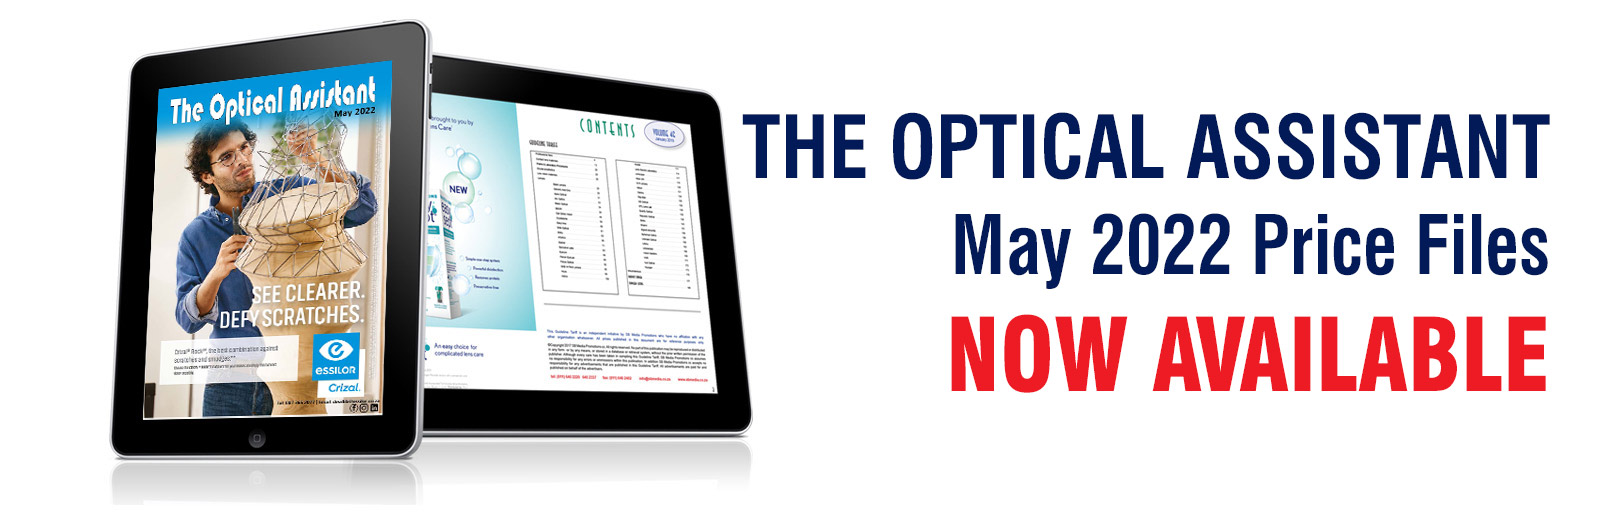 The Optical Assistant, May 2022 Price Files